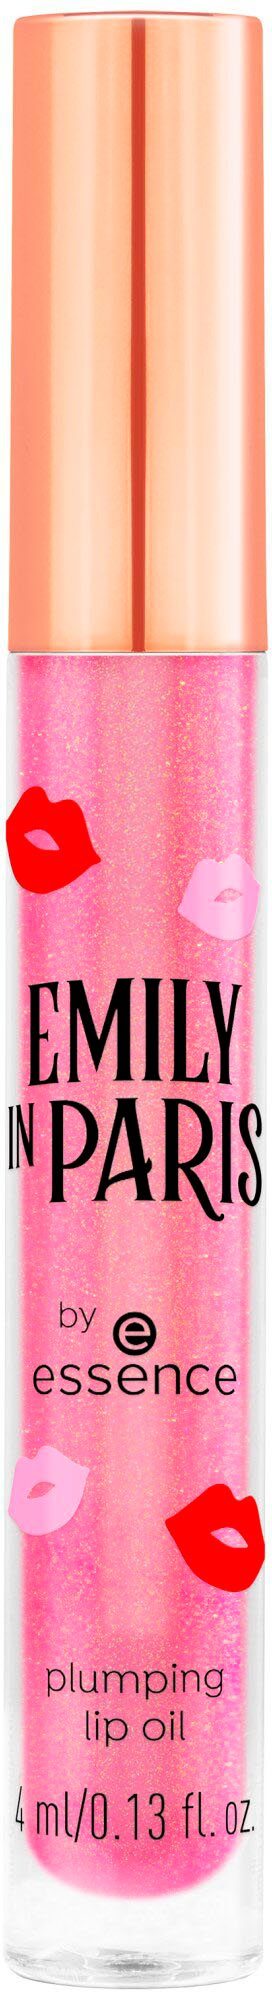 plumping PARIS Lipgloss EMILY essence oil by lip Essence IN